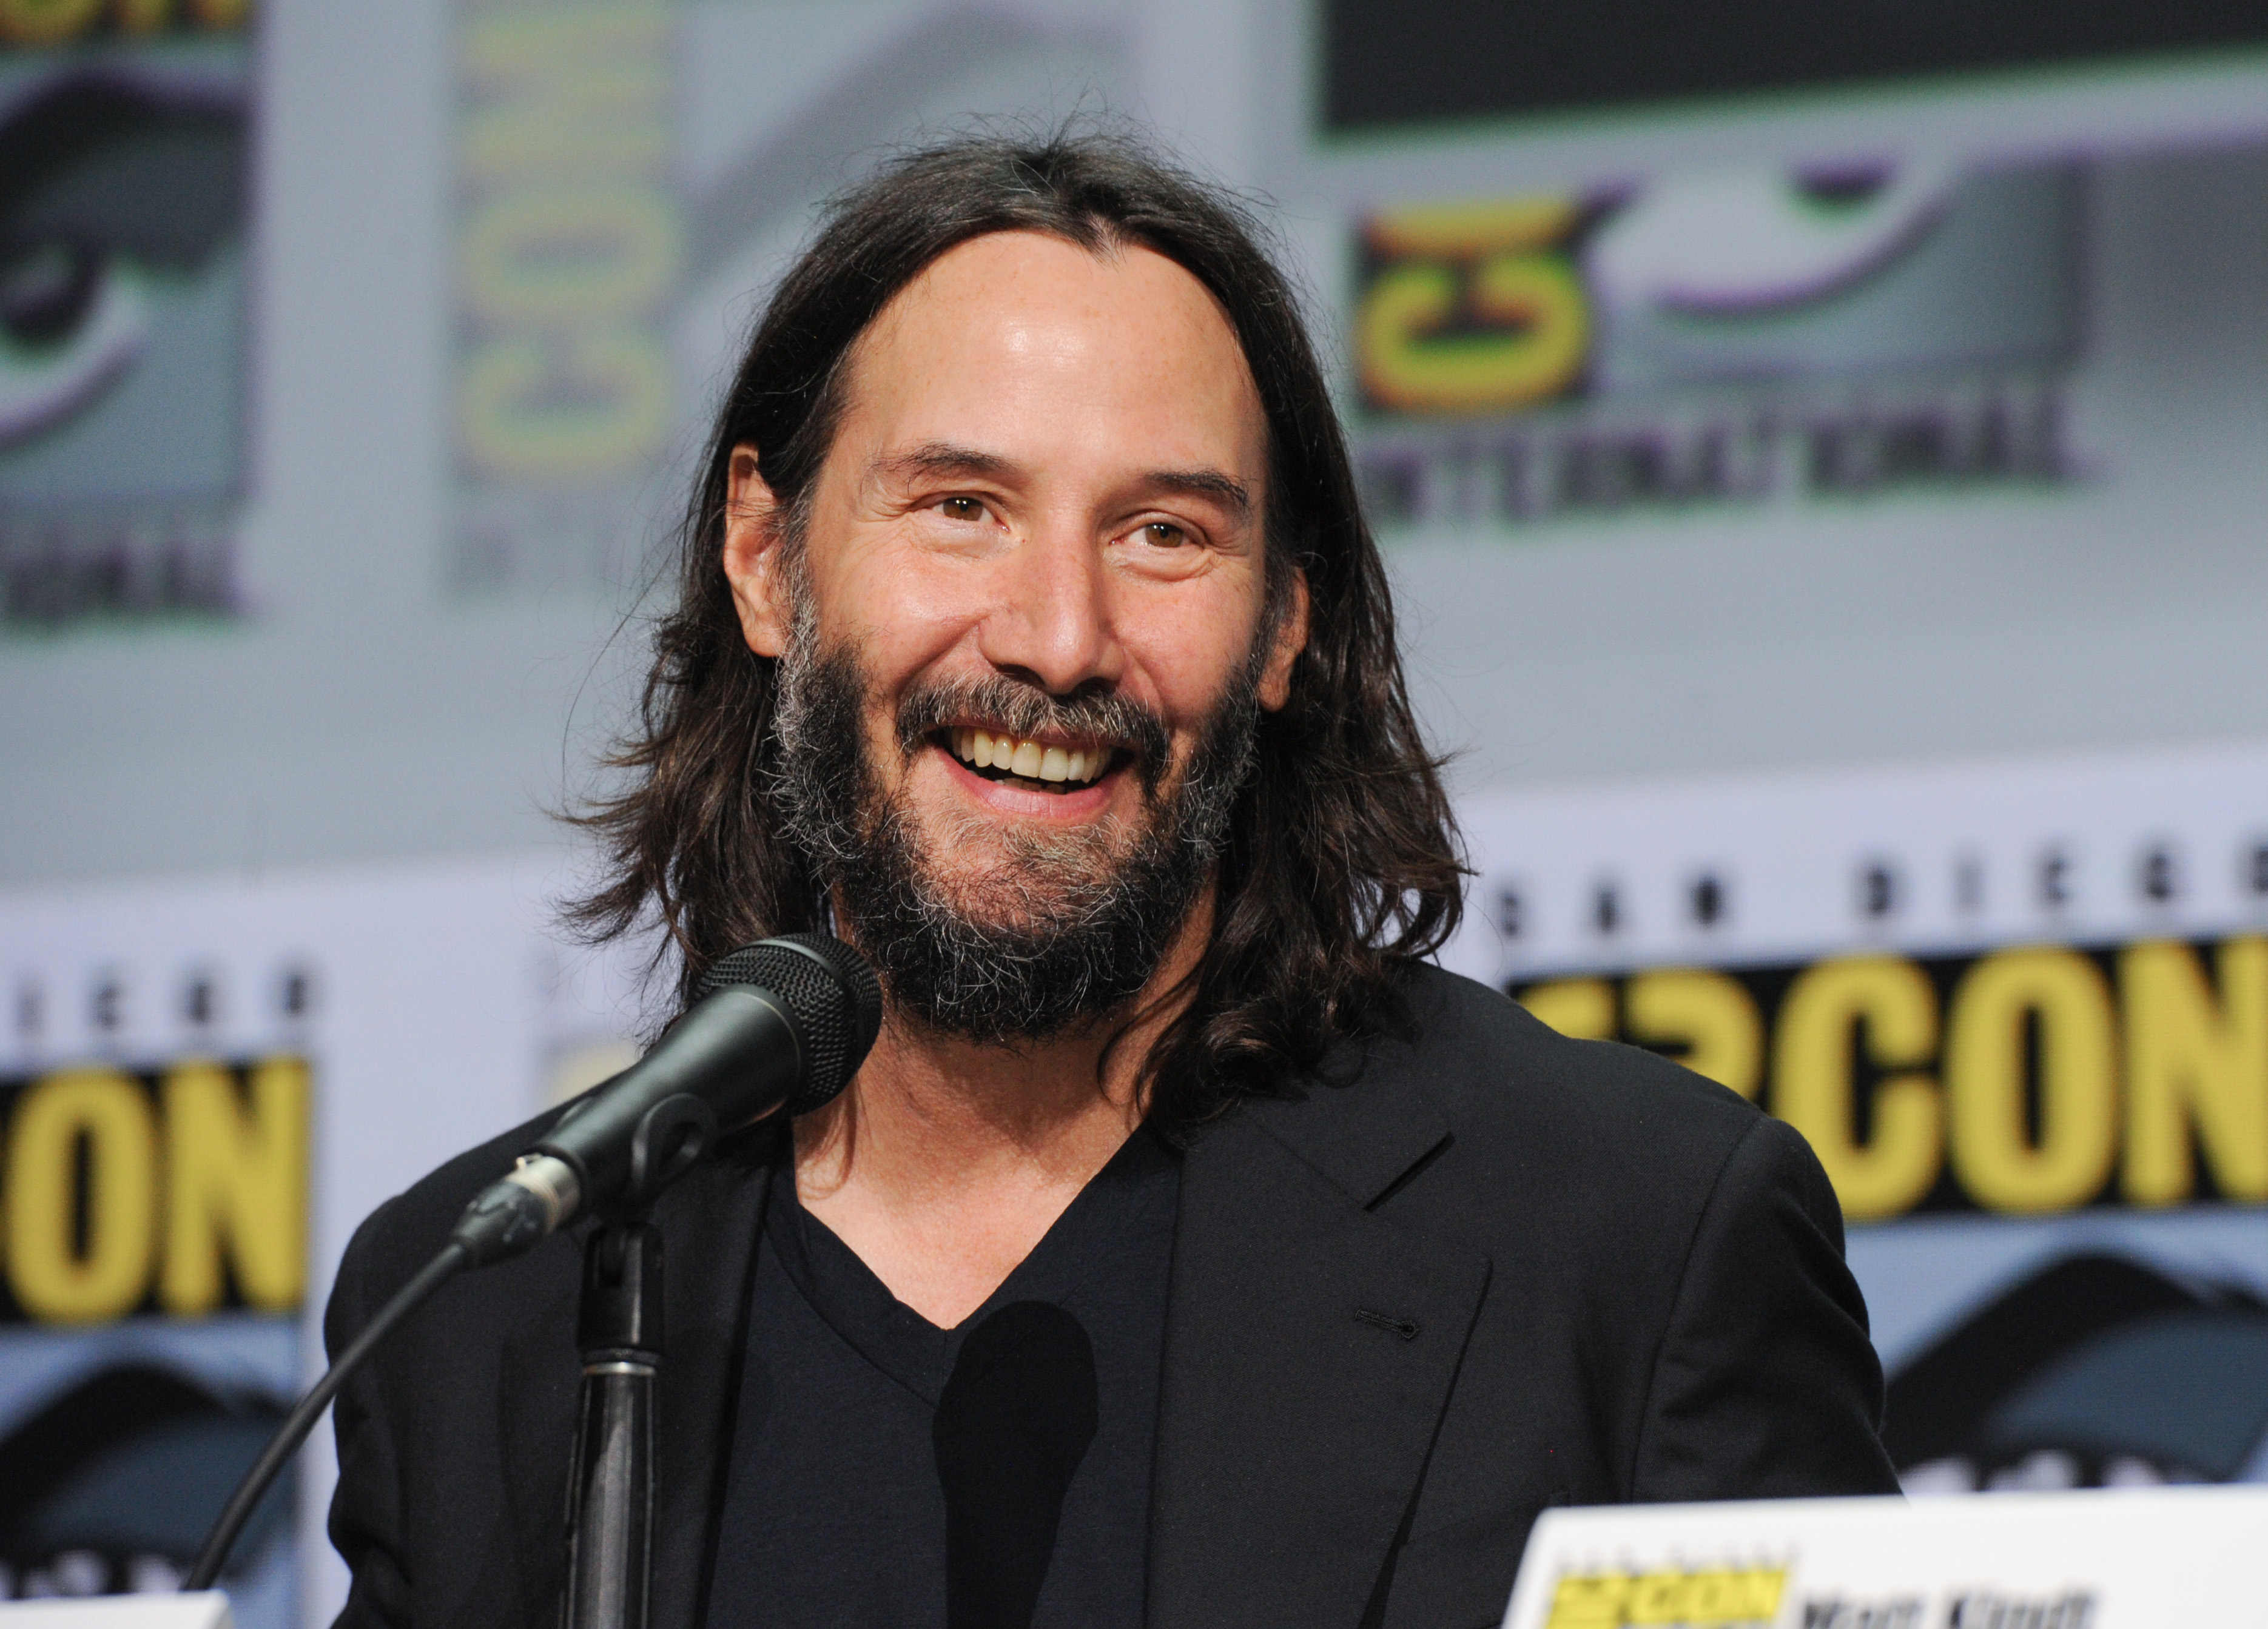 Keanu Reeves during 2022 Comic-Con International on July 22, 2022 in San Diego, California. | Source: Getty Images